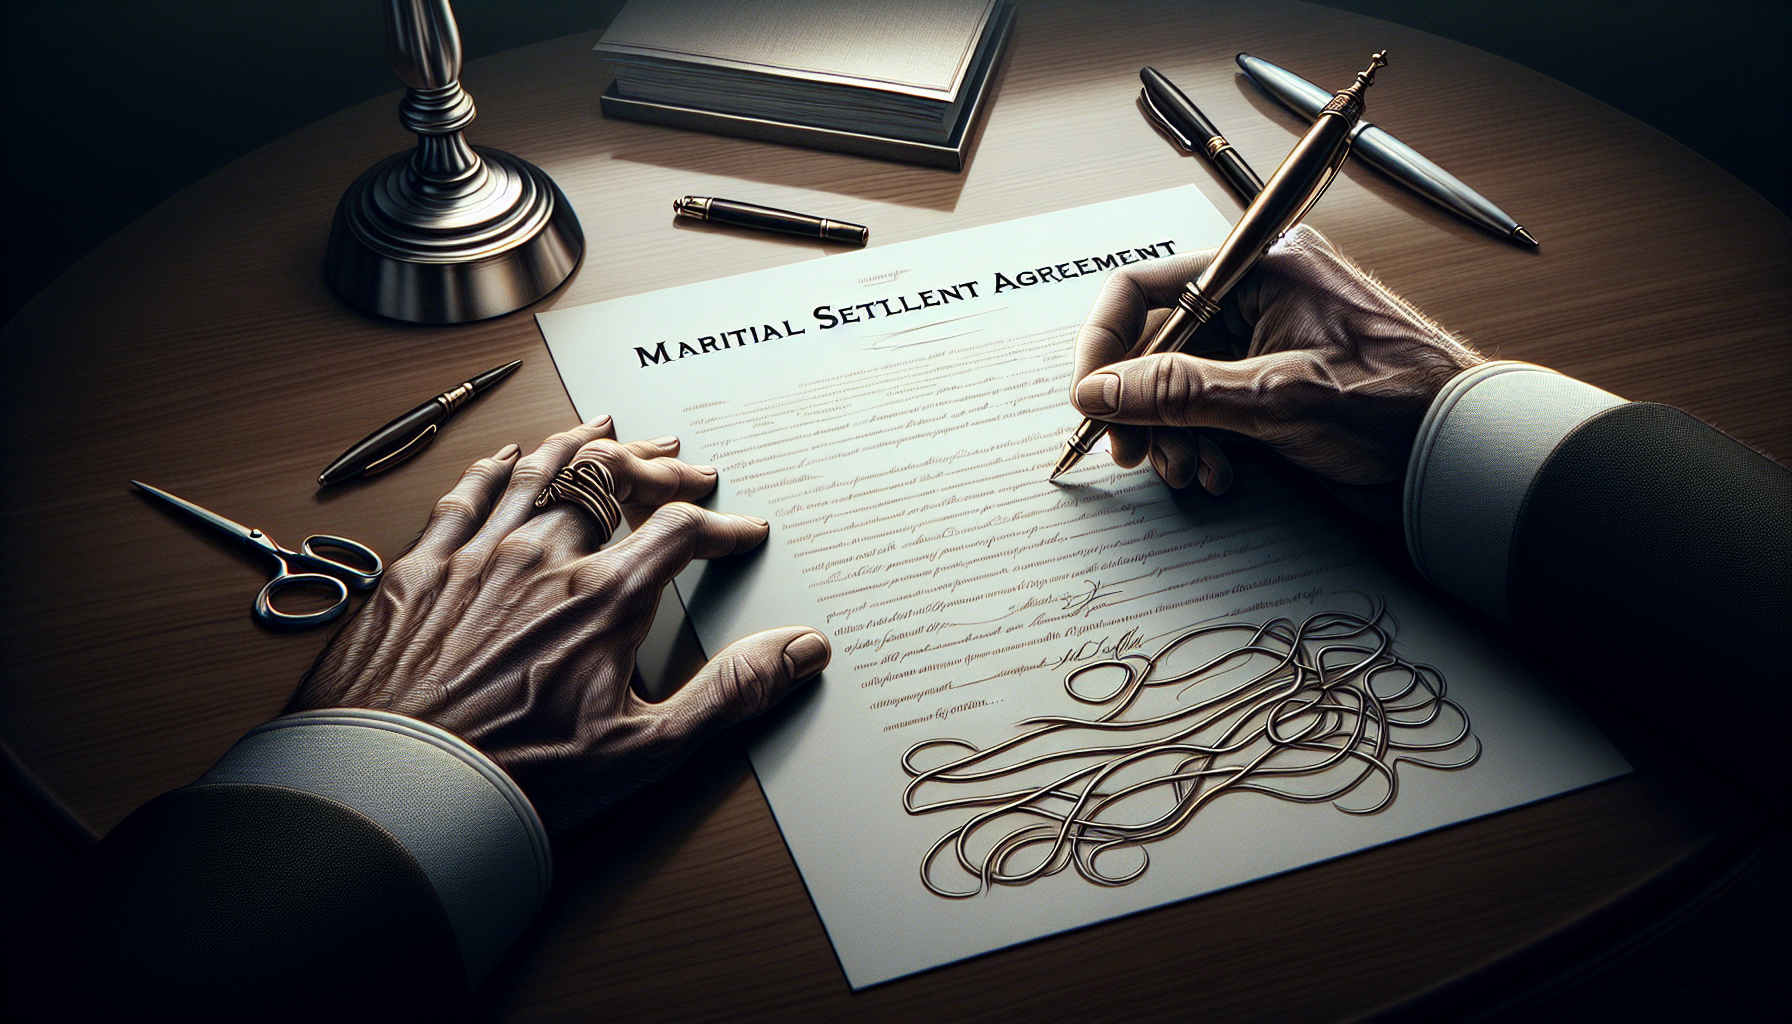 Illustration of a legal document with the title 'Marital Settlement Agreement'